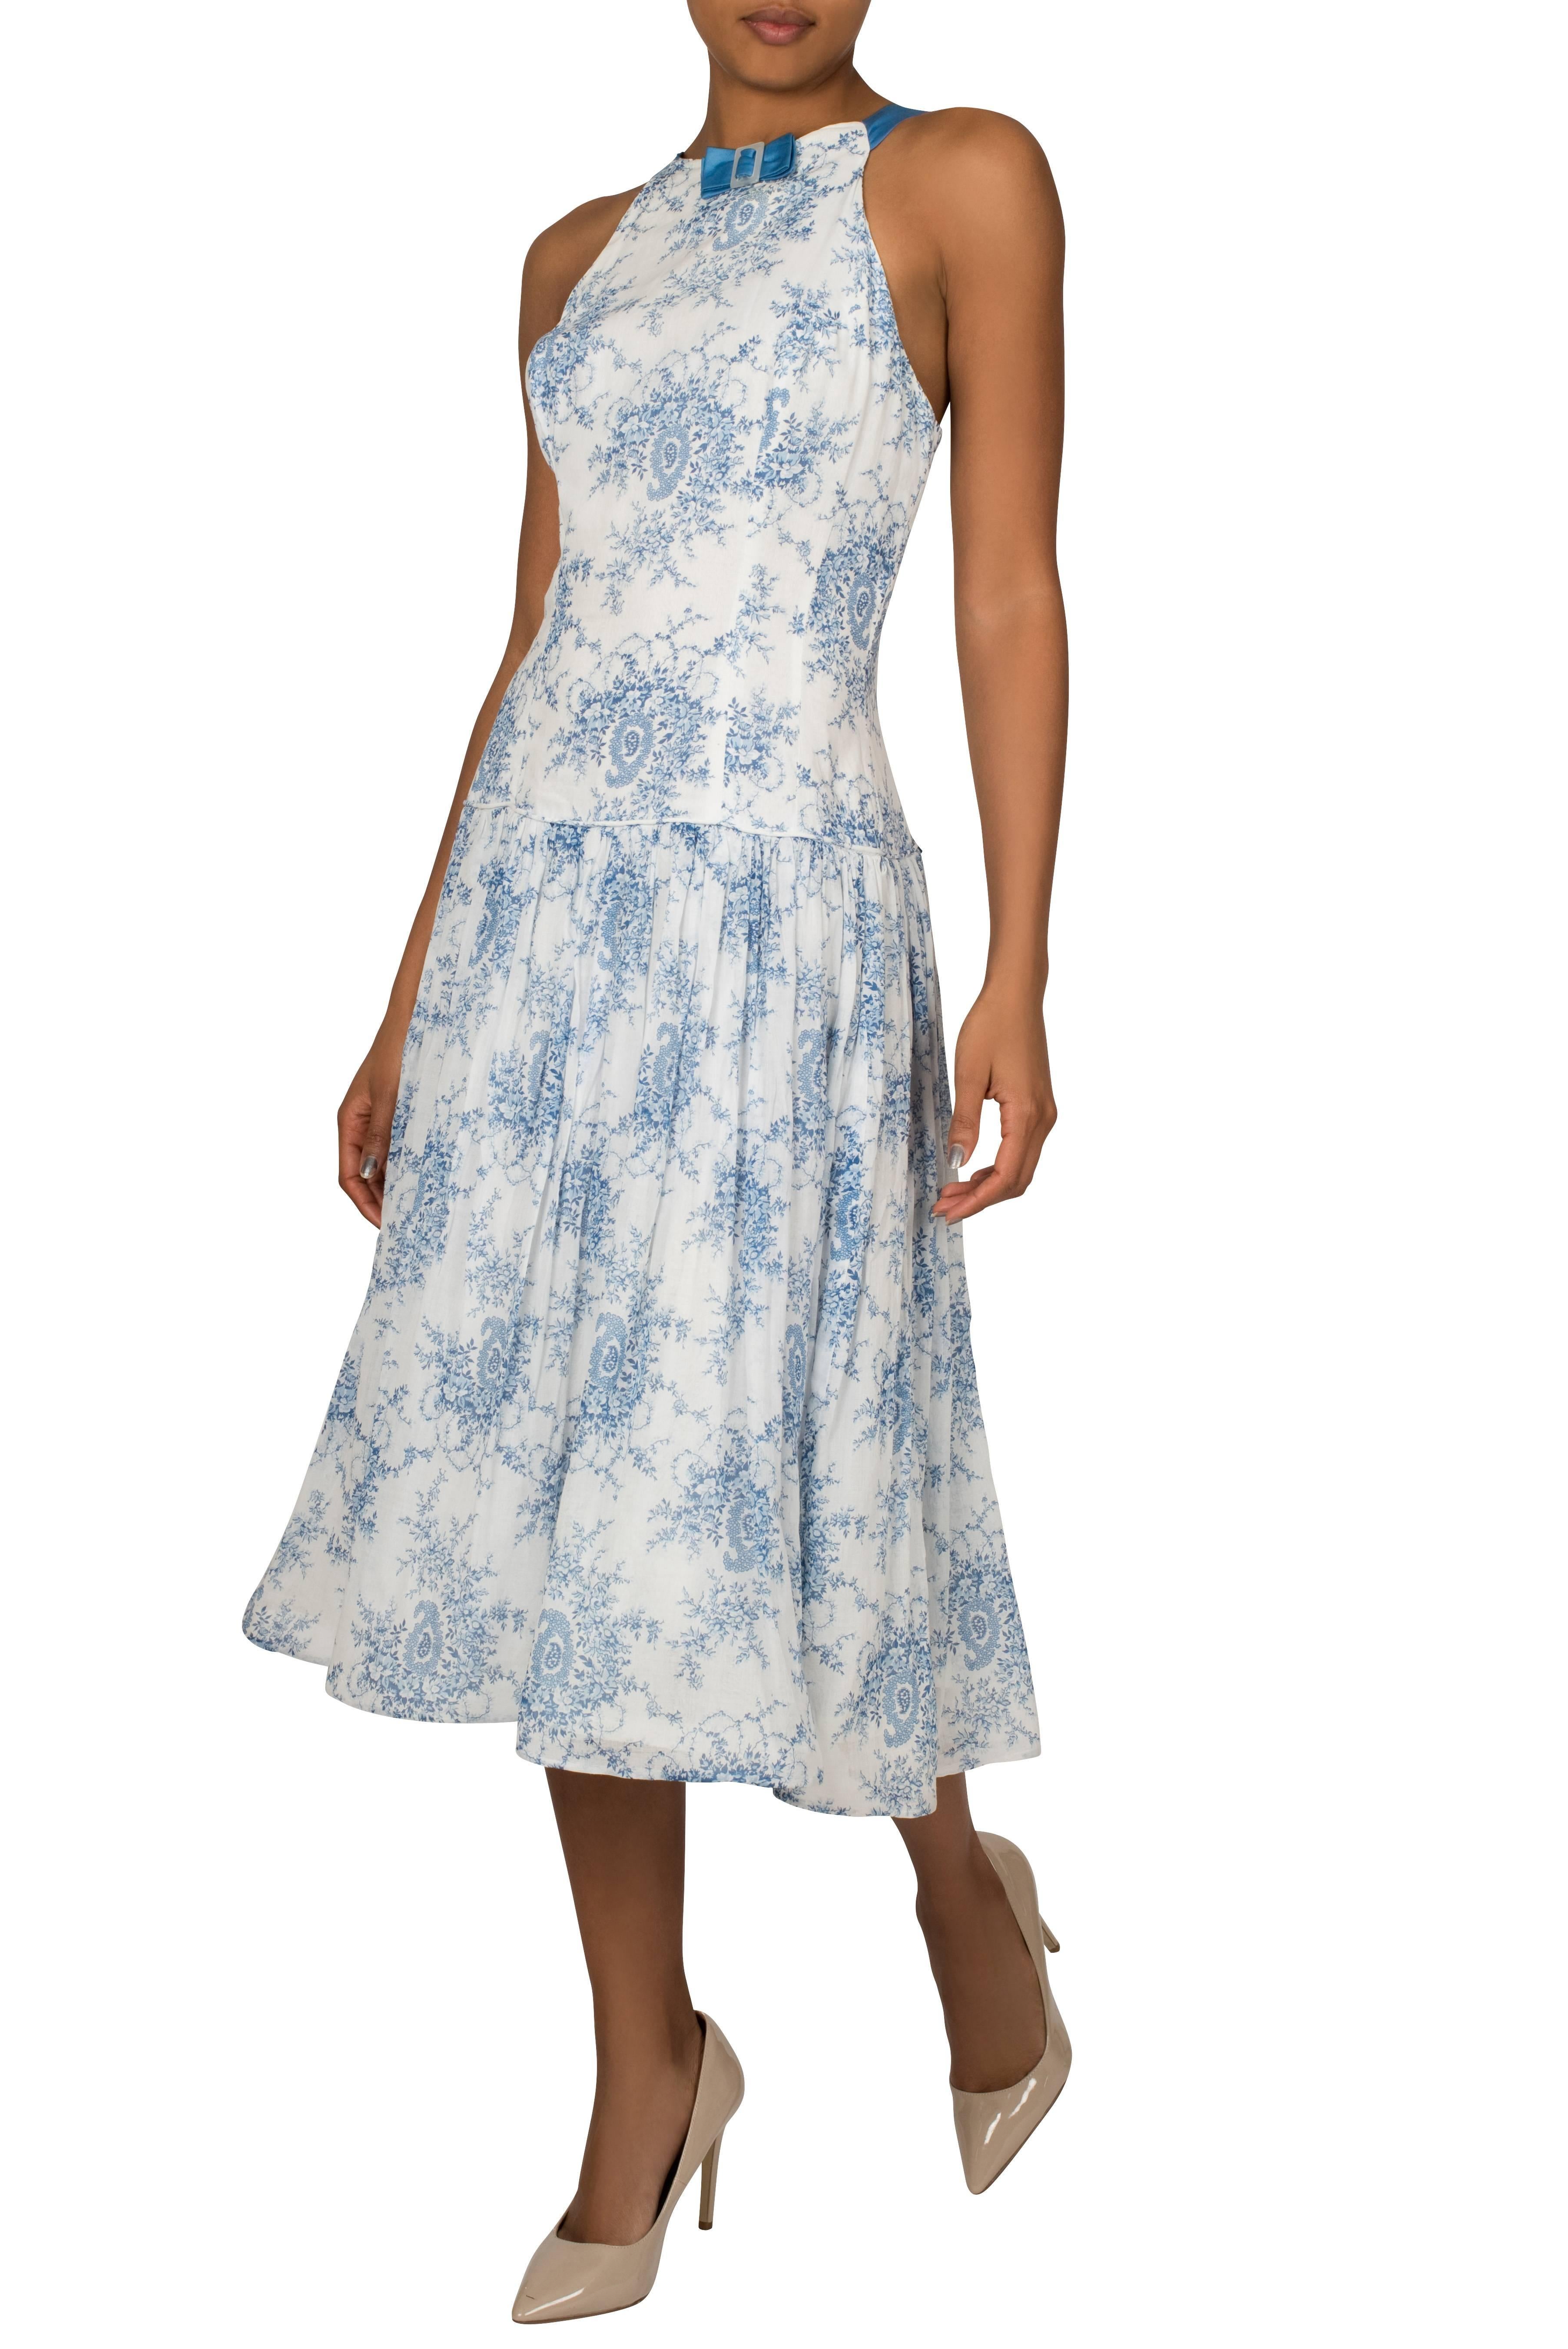 This beautiful late 1940's dress features a floral and paisley print in dutch blue on soft white lightweight woven cotton. The high neckline is detailed with a simple blue bow and the shoulder straps, also in blue reveal a low gradually scooping